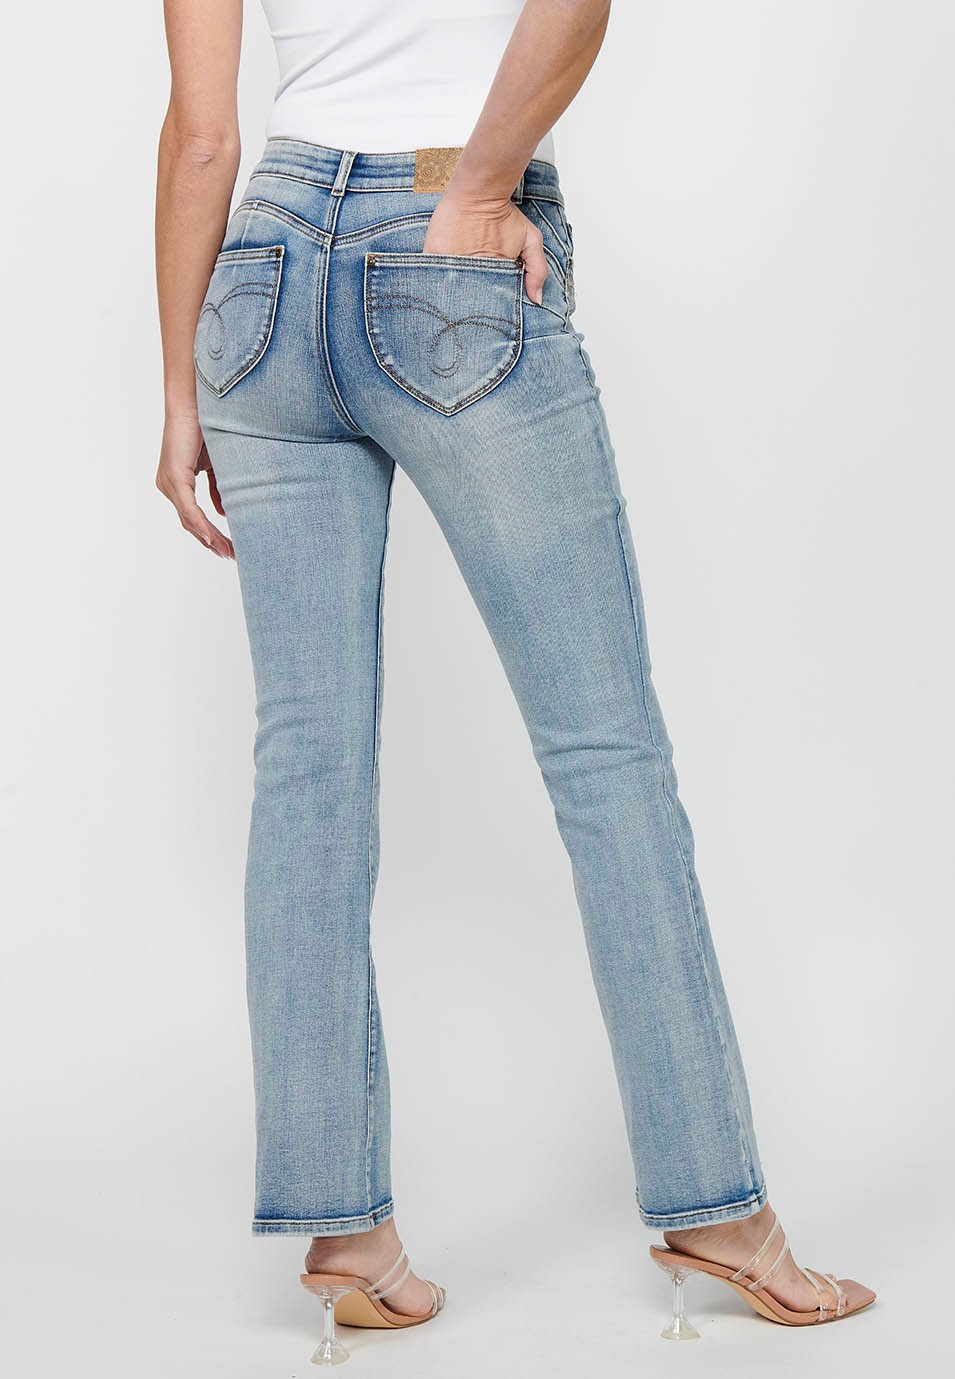 Long bell-bottom pants with front zipper and button closure with light blue ripped details for women 2